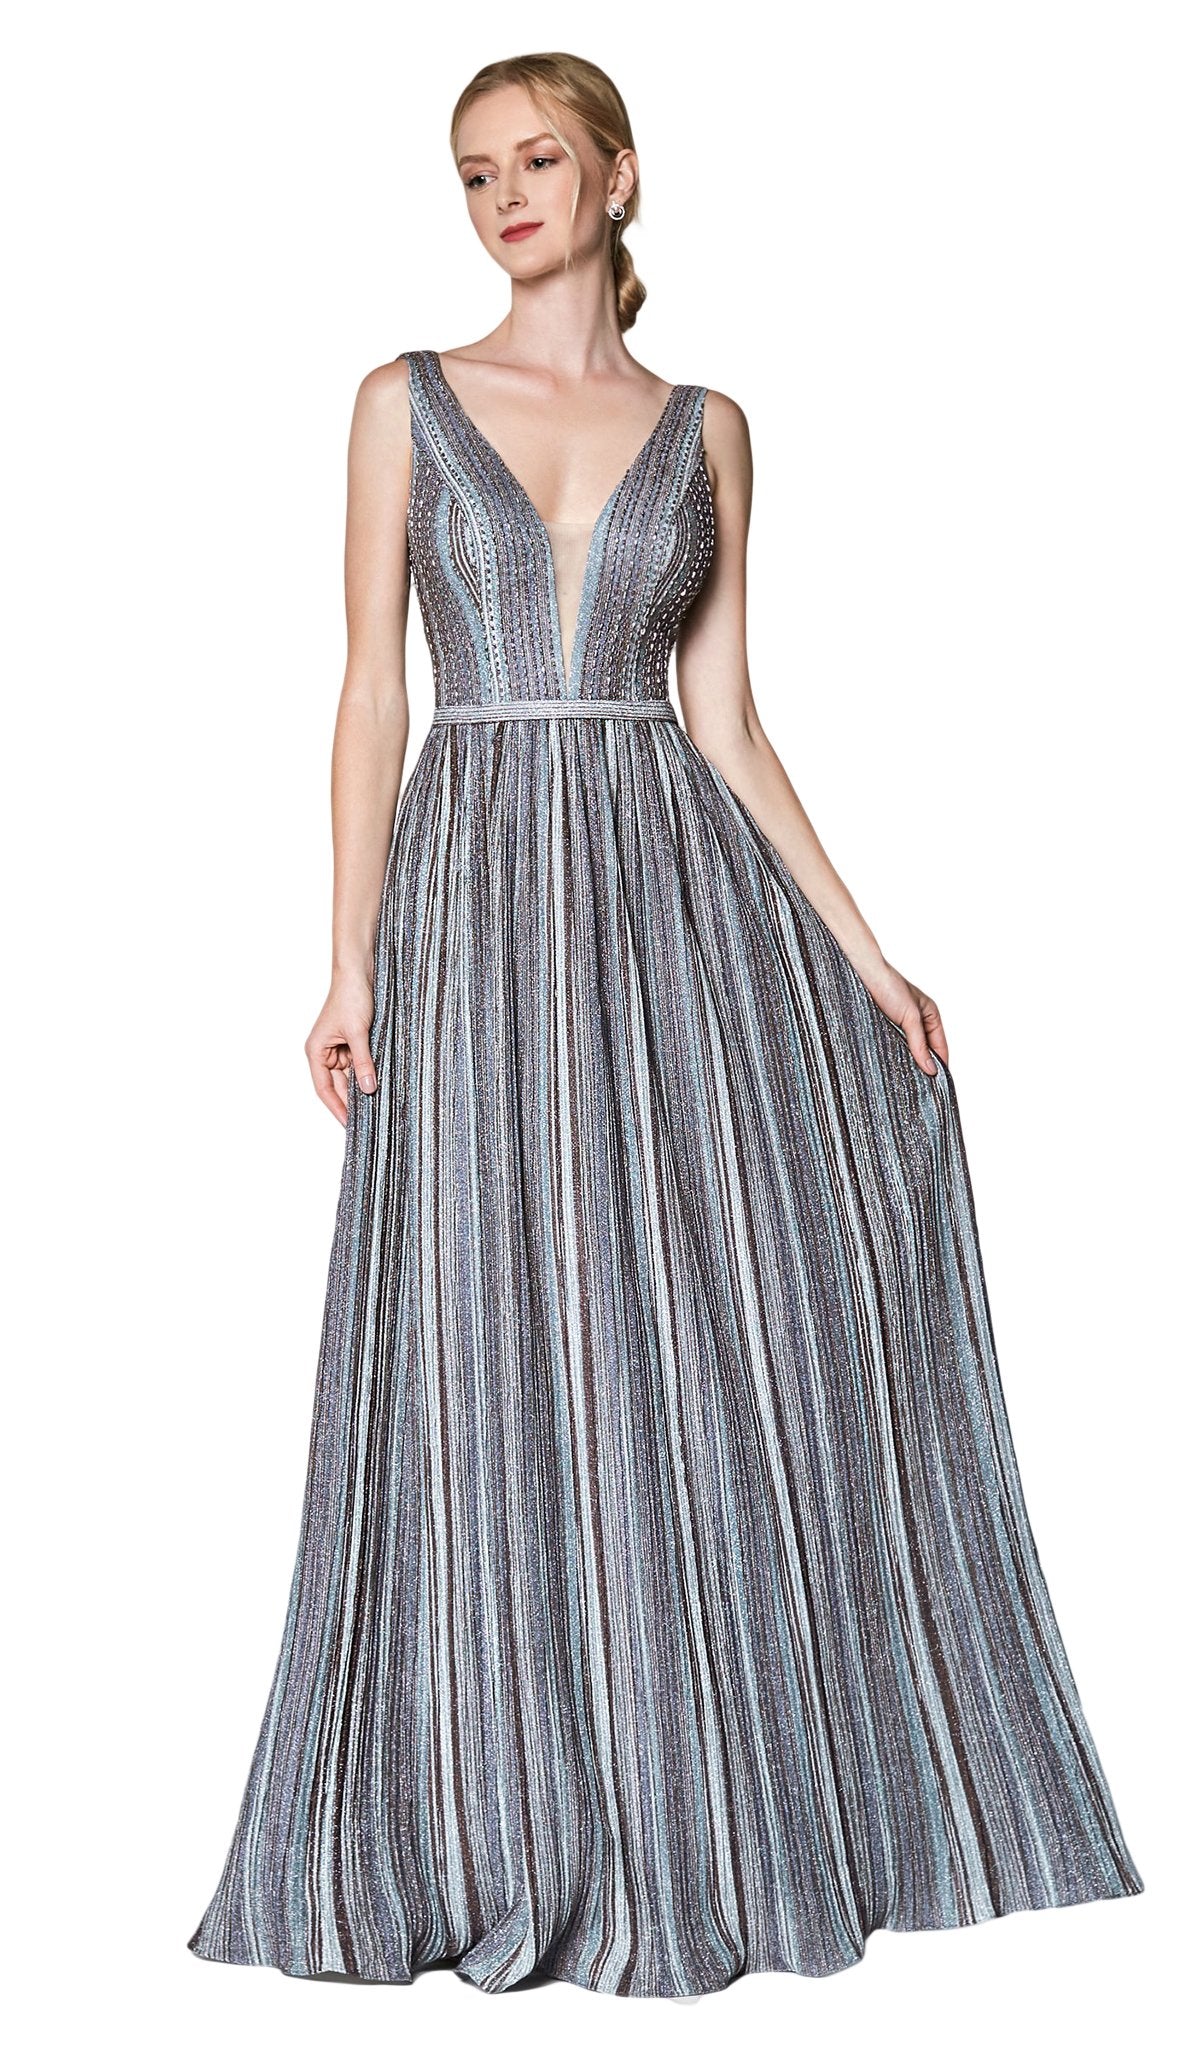 Cinderella Divine - CZ0015 Striped Metallic A-Line Gown In Blue and Gray